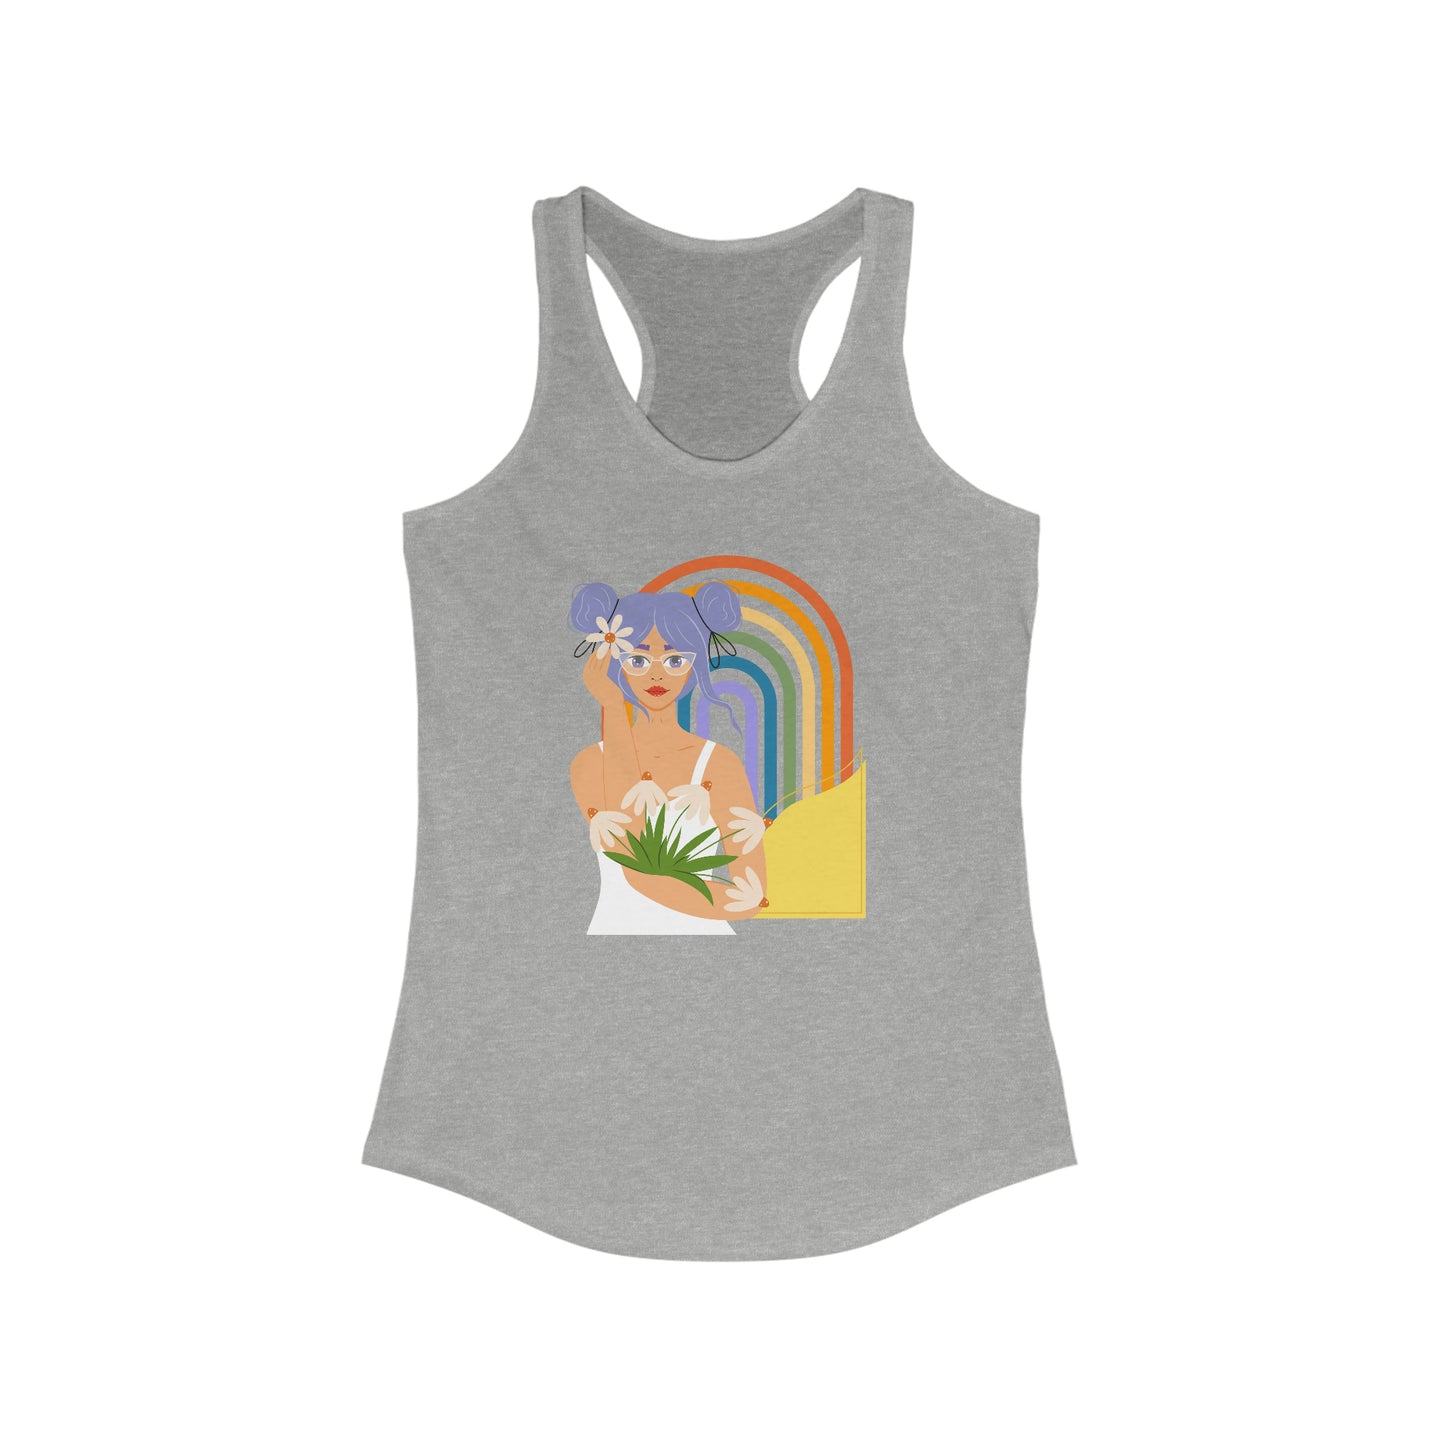 Just Be You - Racerback Tank